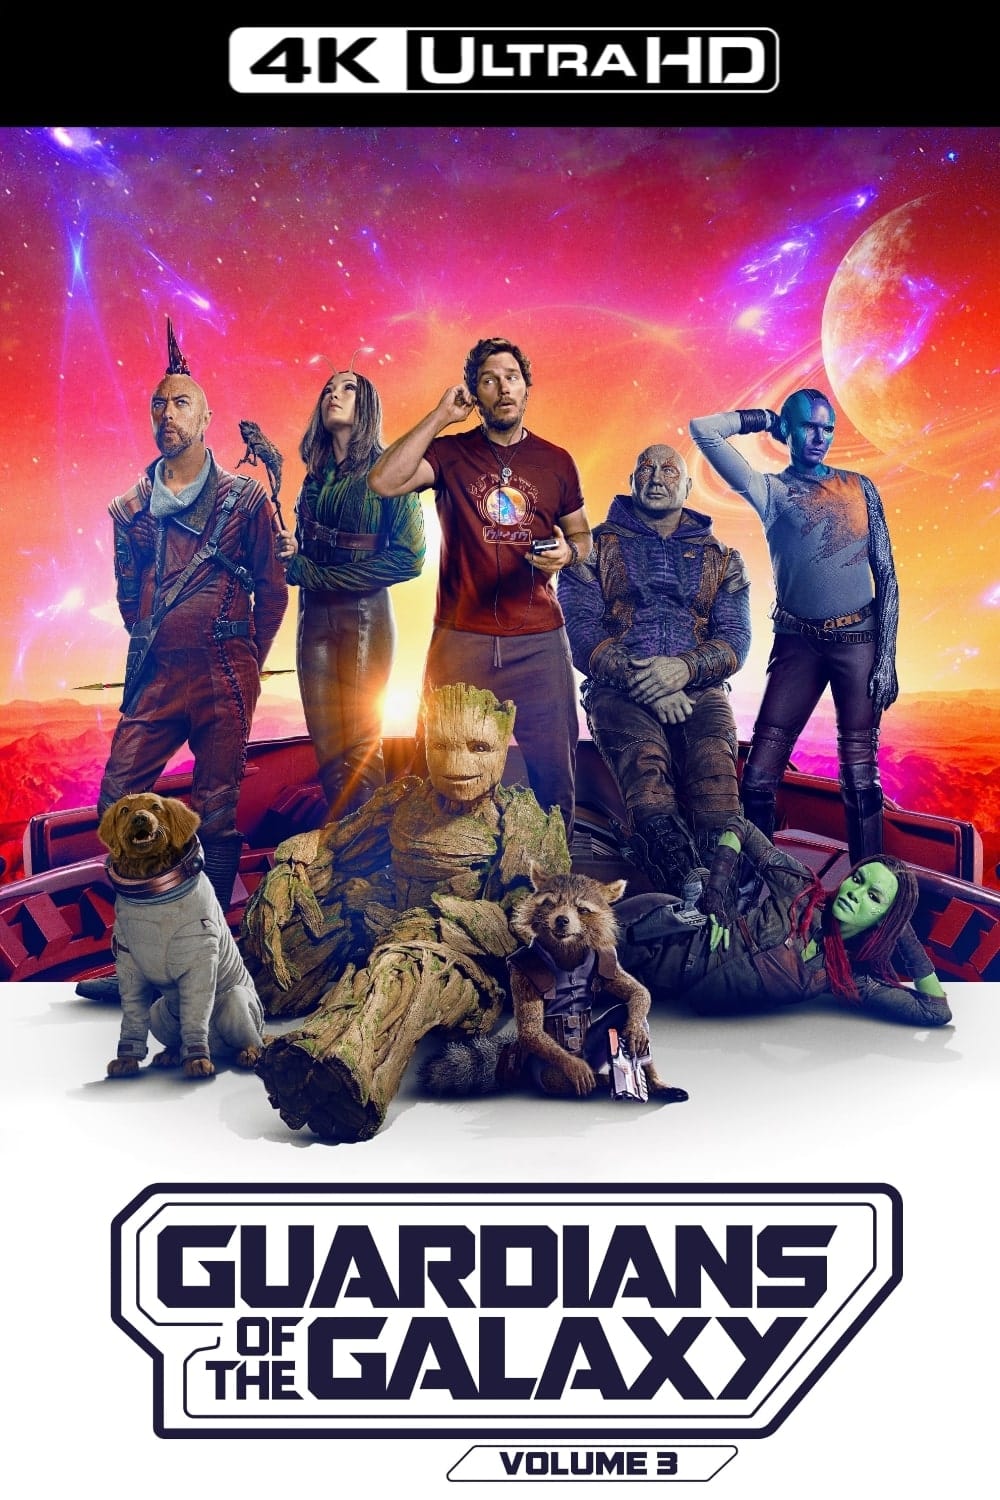 Guardians of the Galaxy Vol. 3 Posters